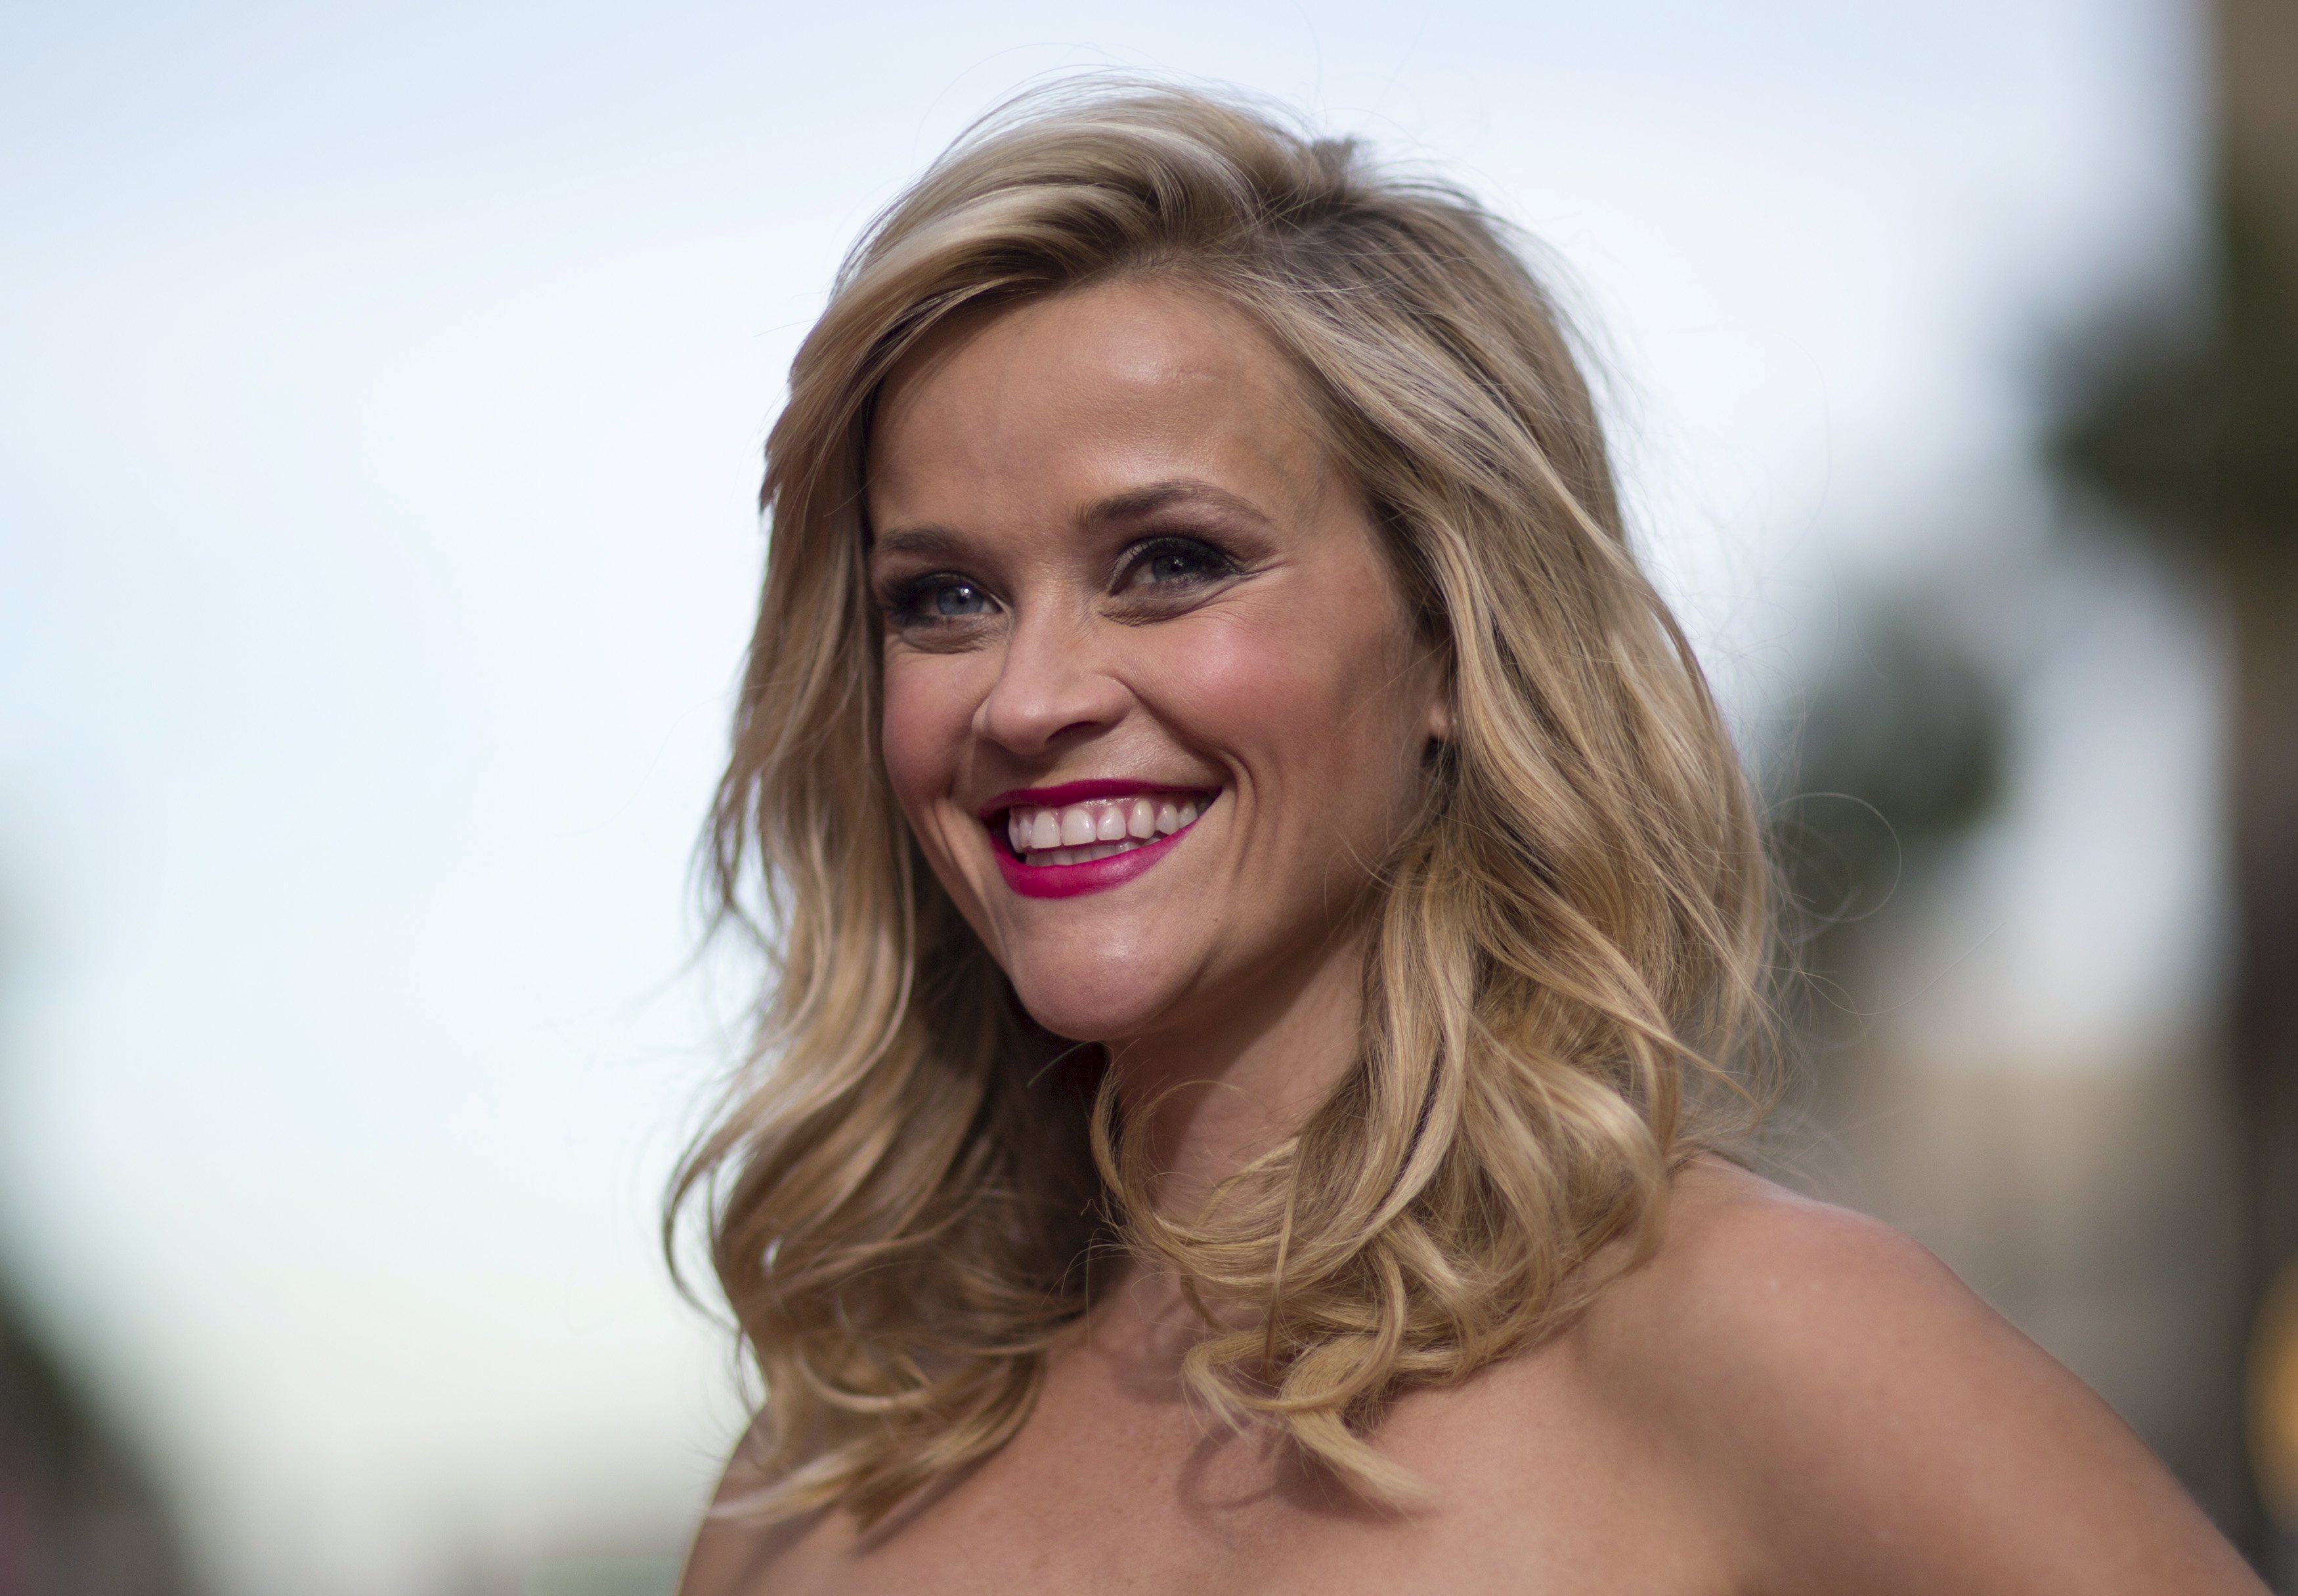 Reese Witherspoon #15